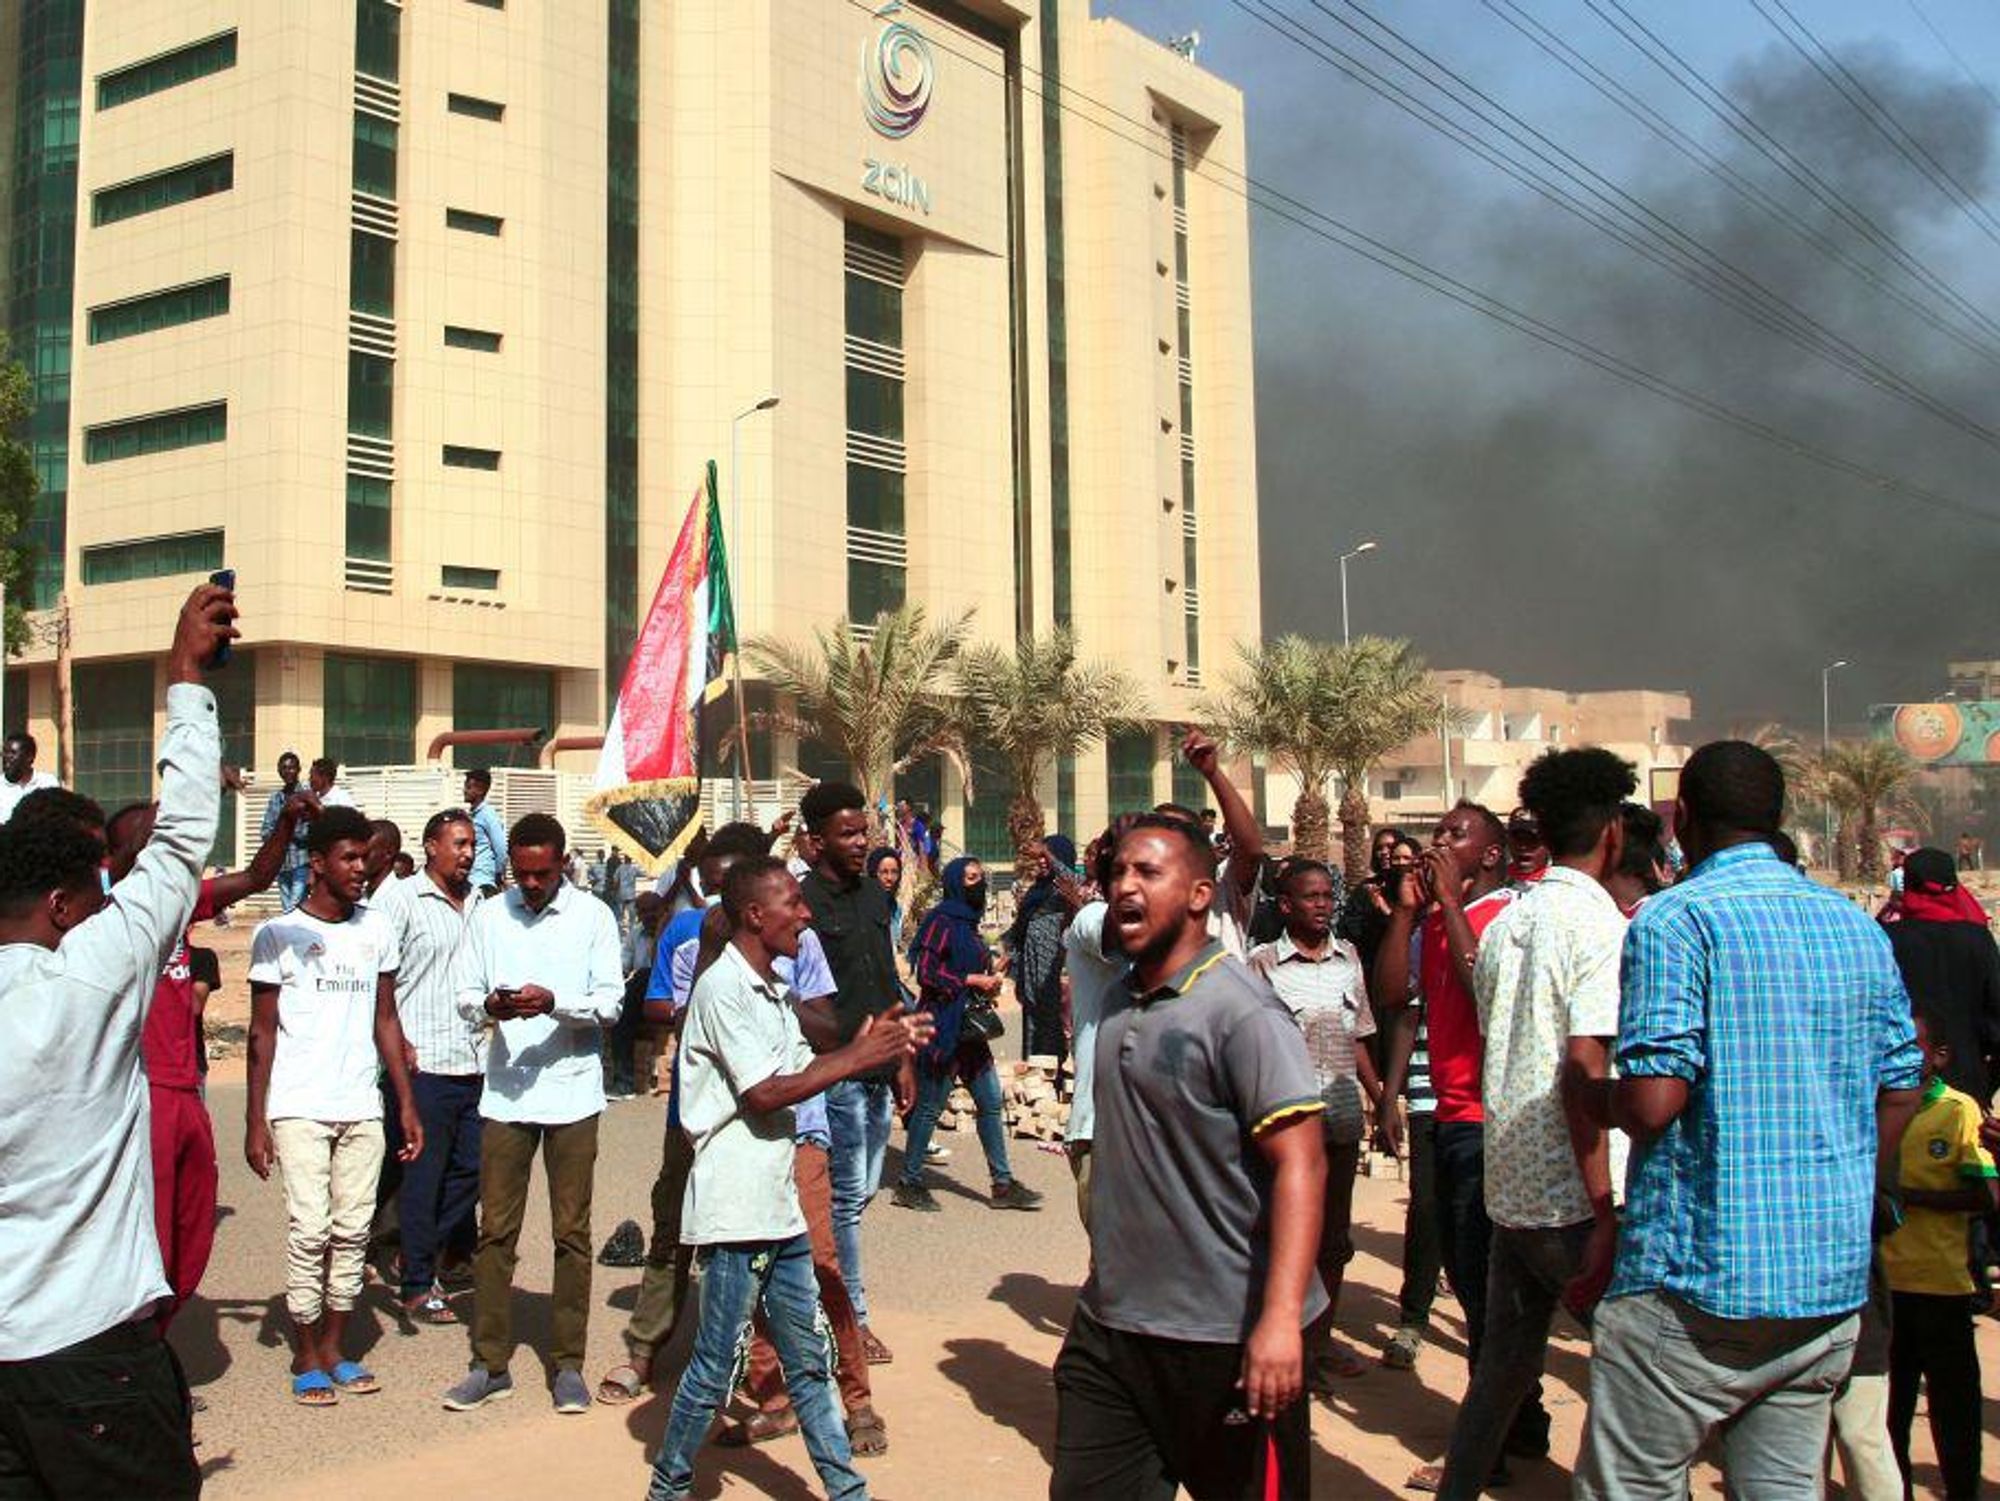 Sudan Declares State of Emergency, As Military Dissolves Transitional Government